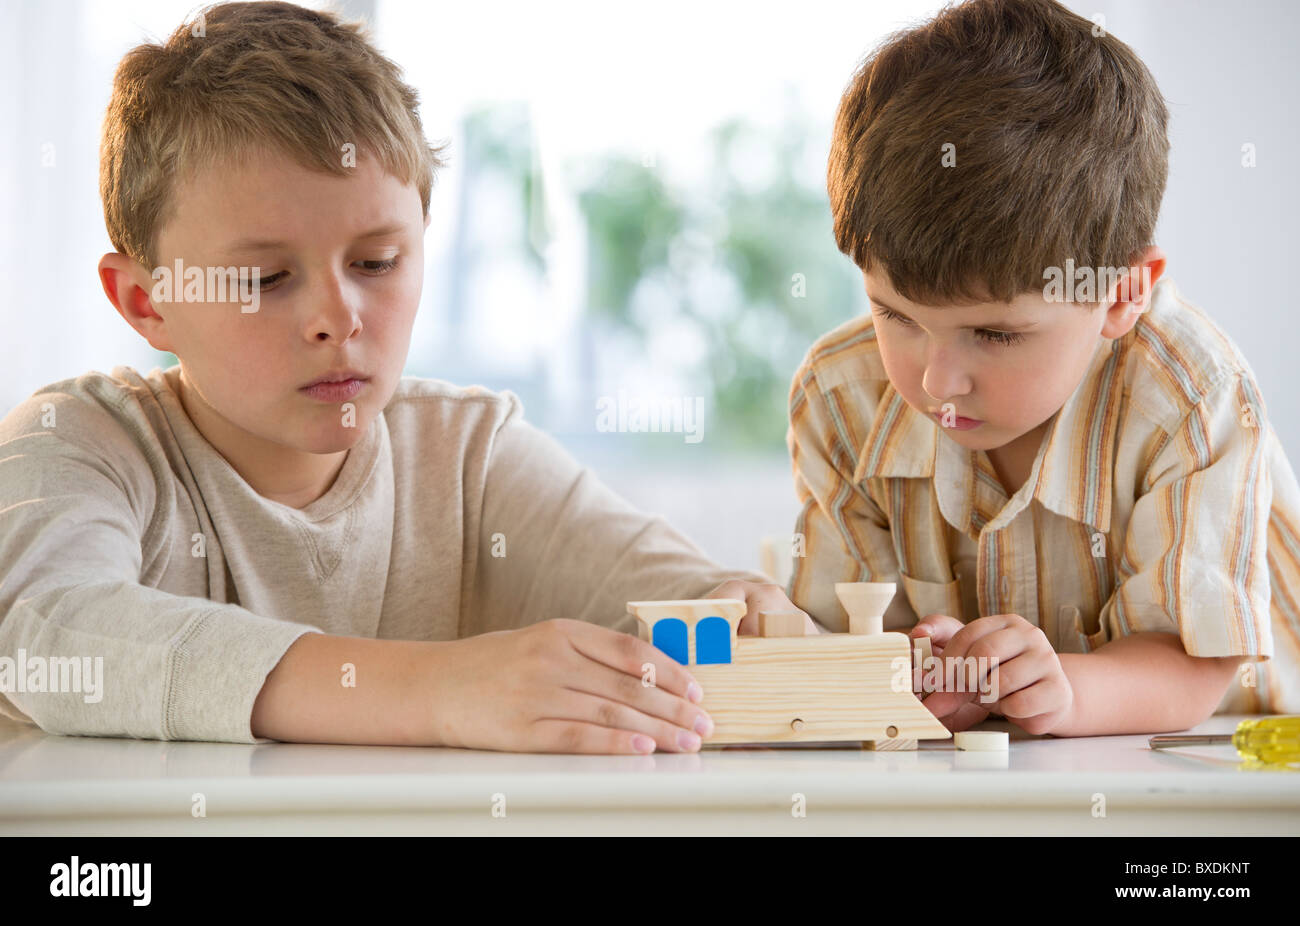 Two young boys building a wooden train Stock Photo